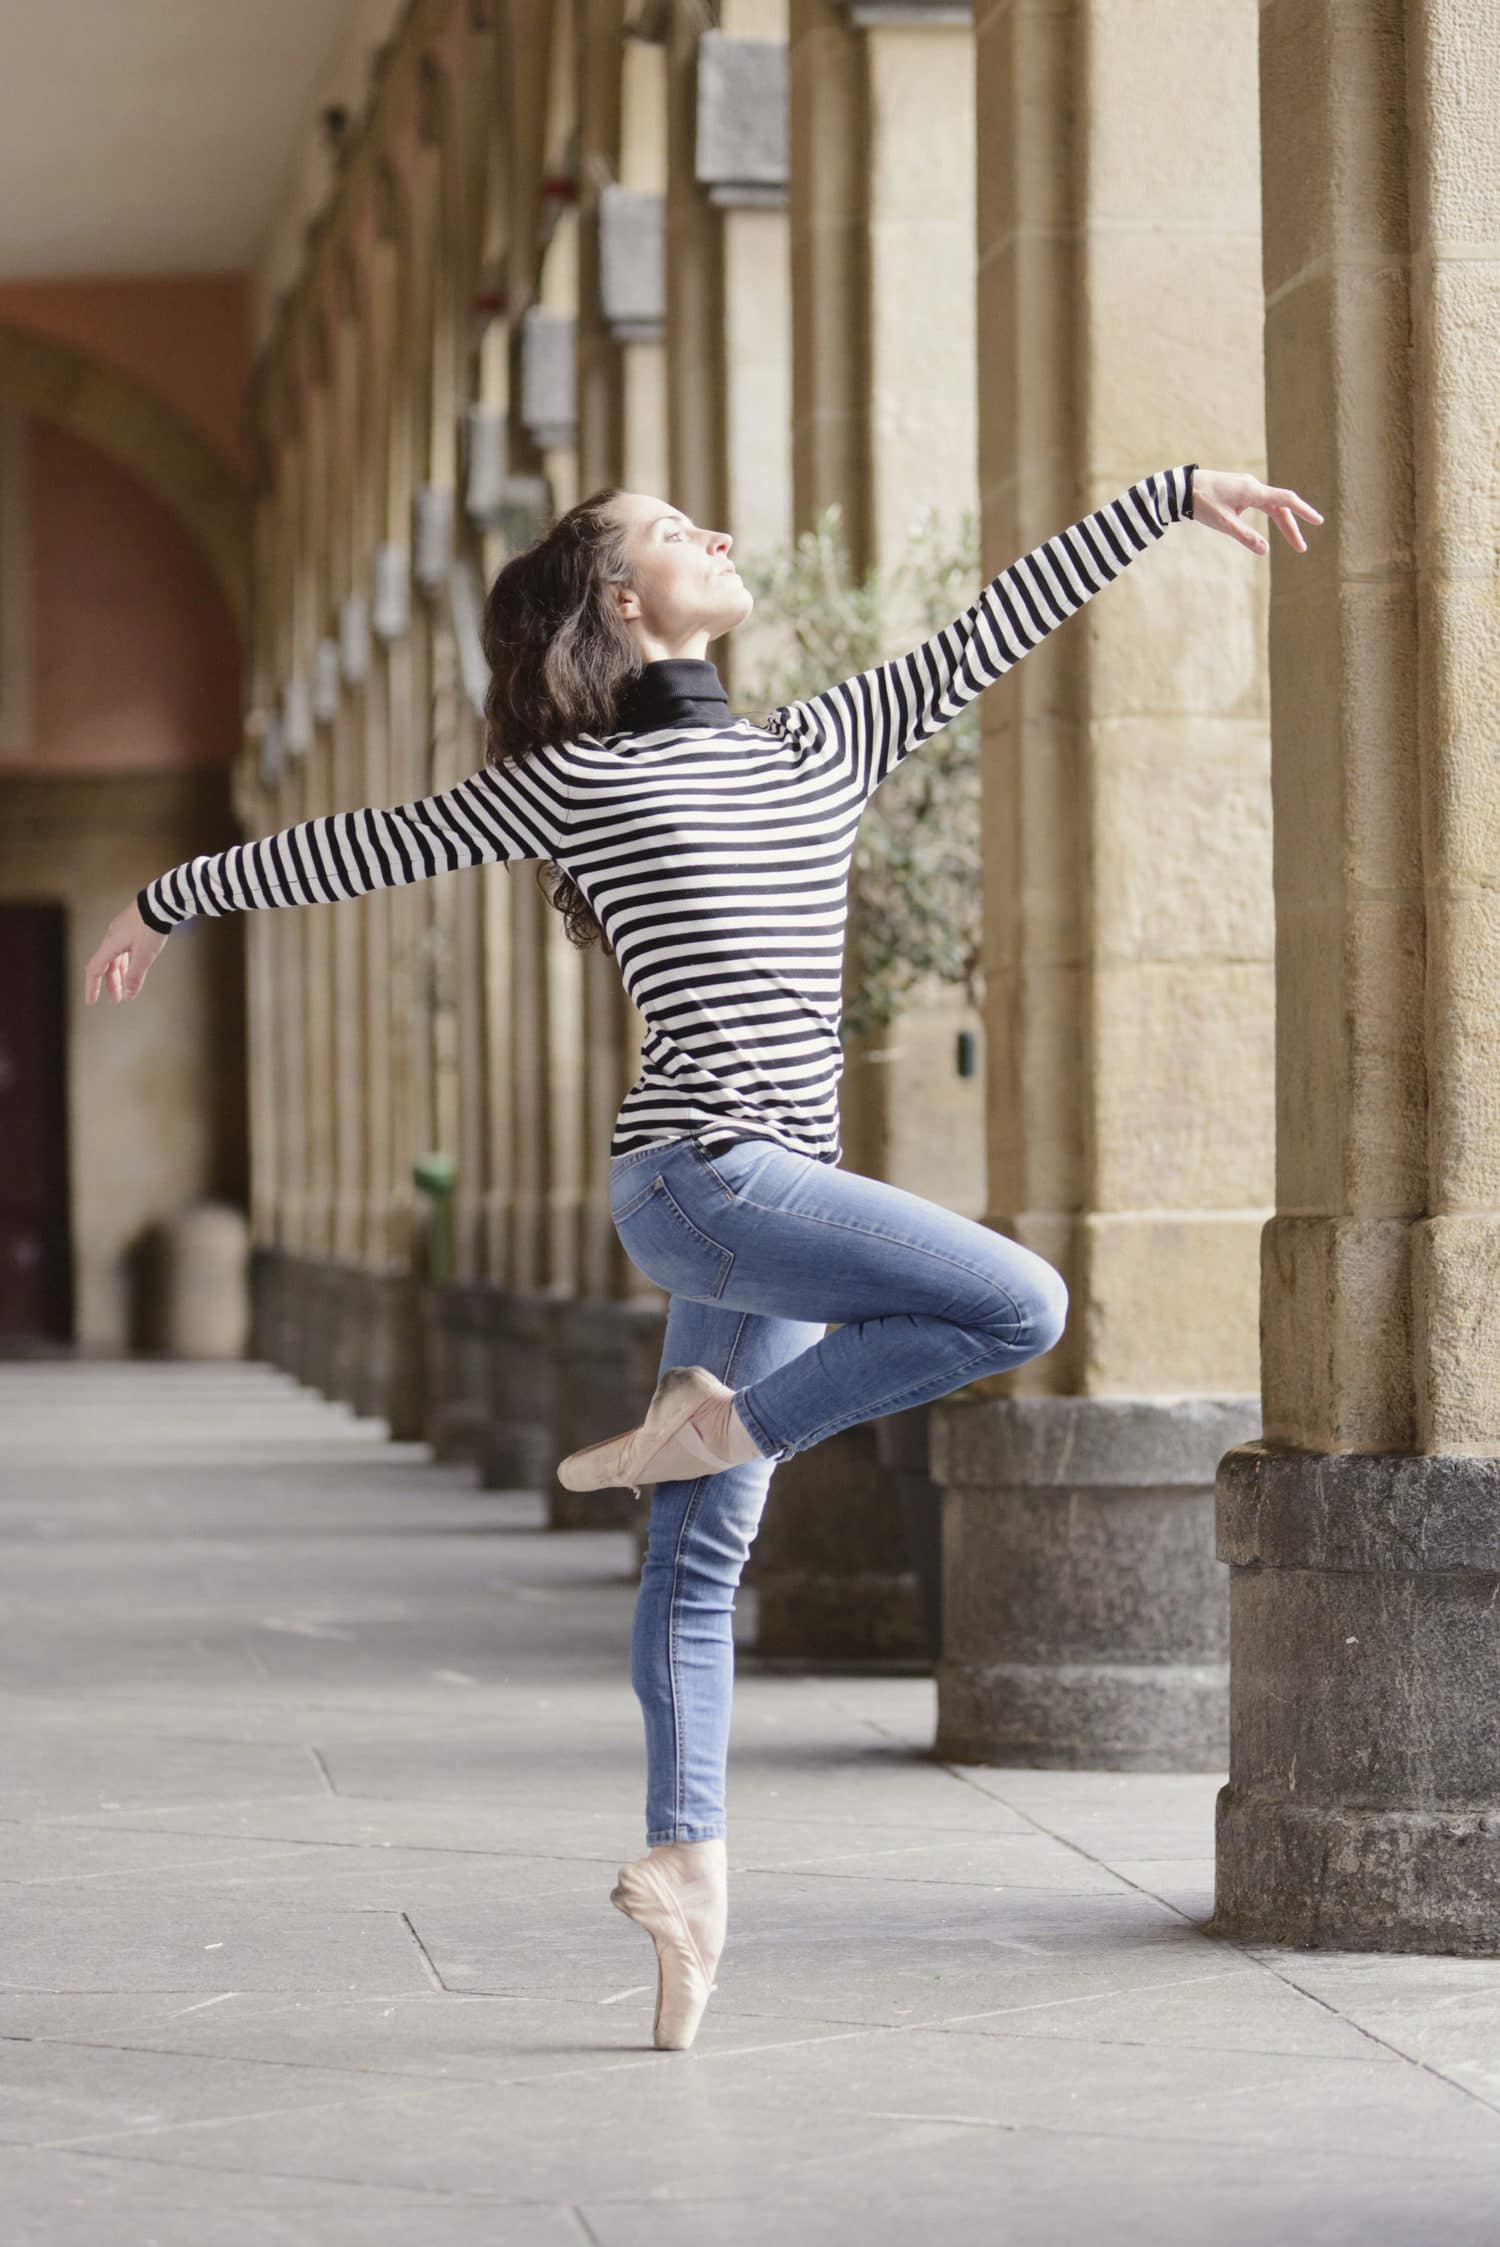 TIPS (THAT NO ONE WILL TELL YOU) FOR EXCELLENT DANCE PHOTOGRAPHS